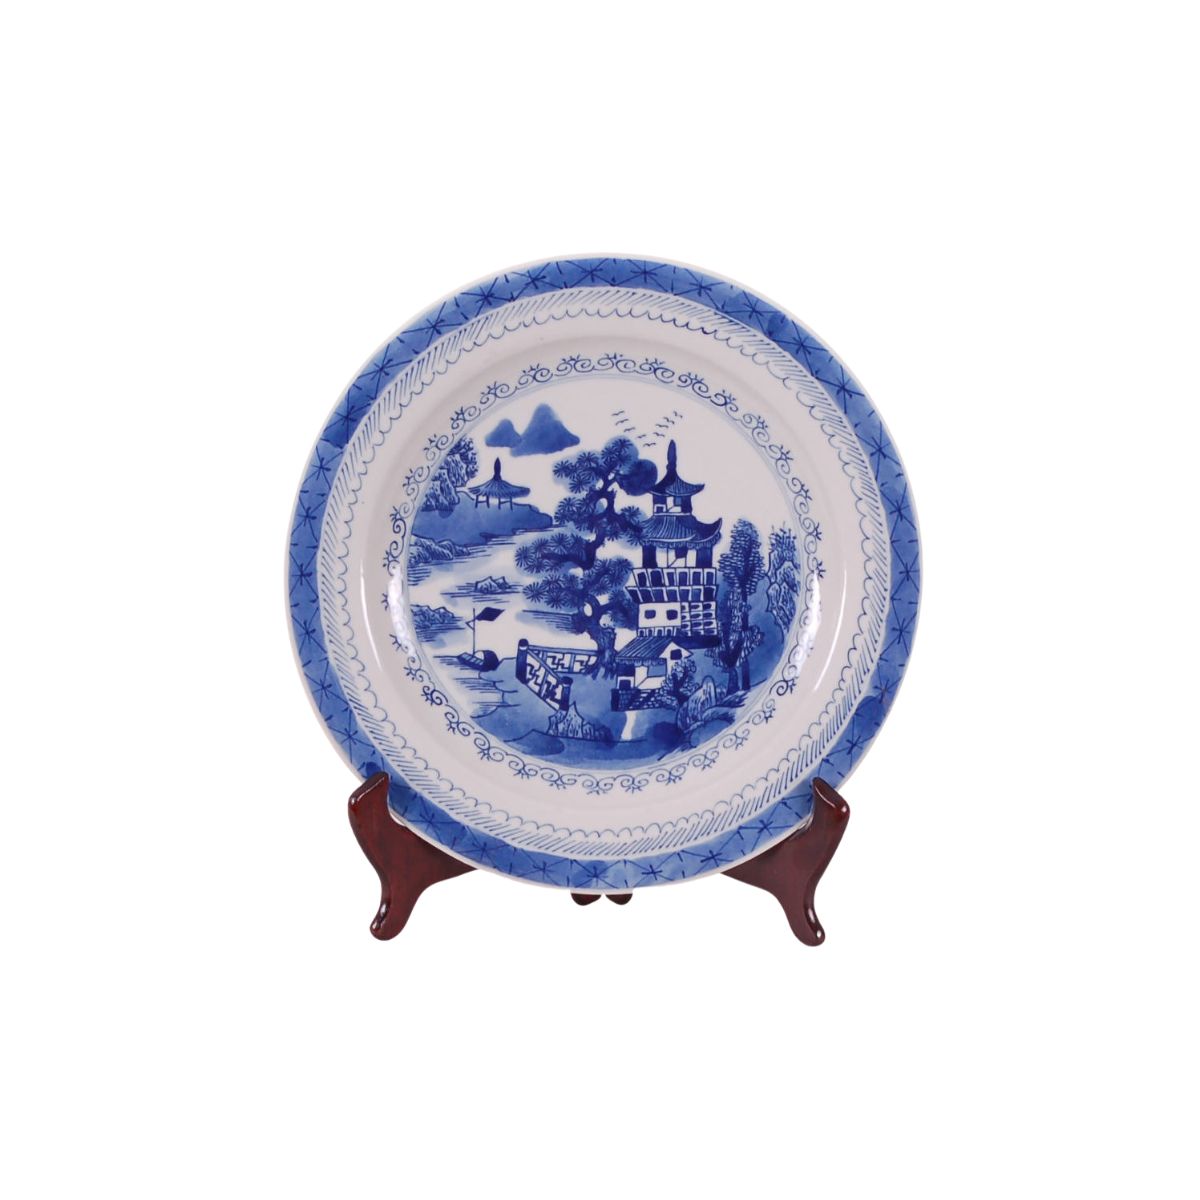 Blue and White Chinese Porcelain Plate, Canton Design